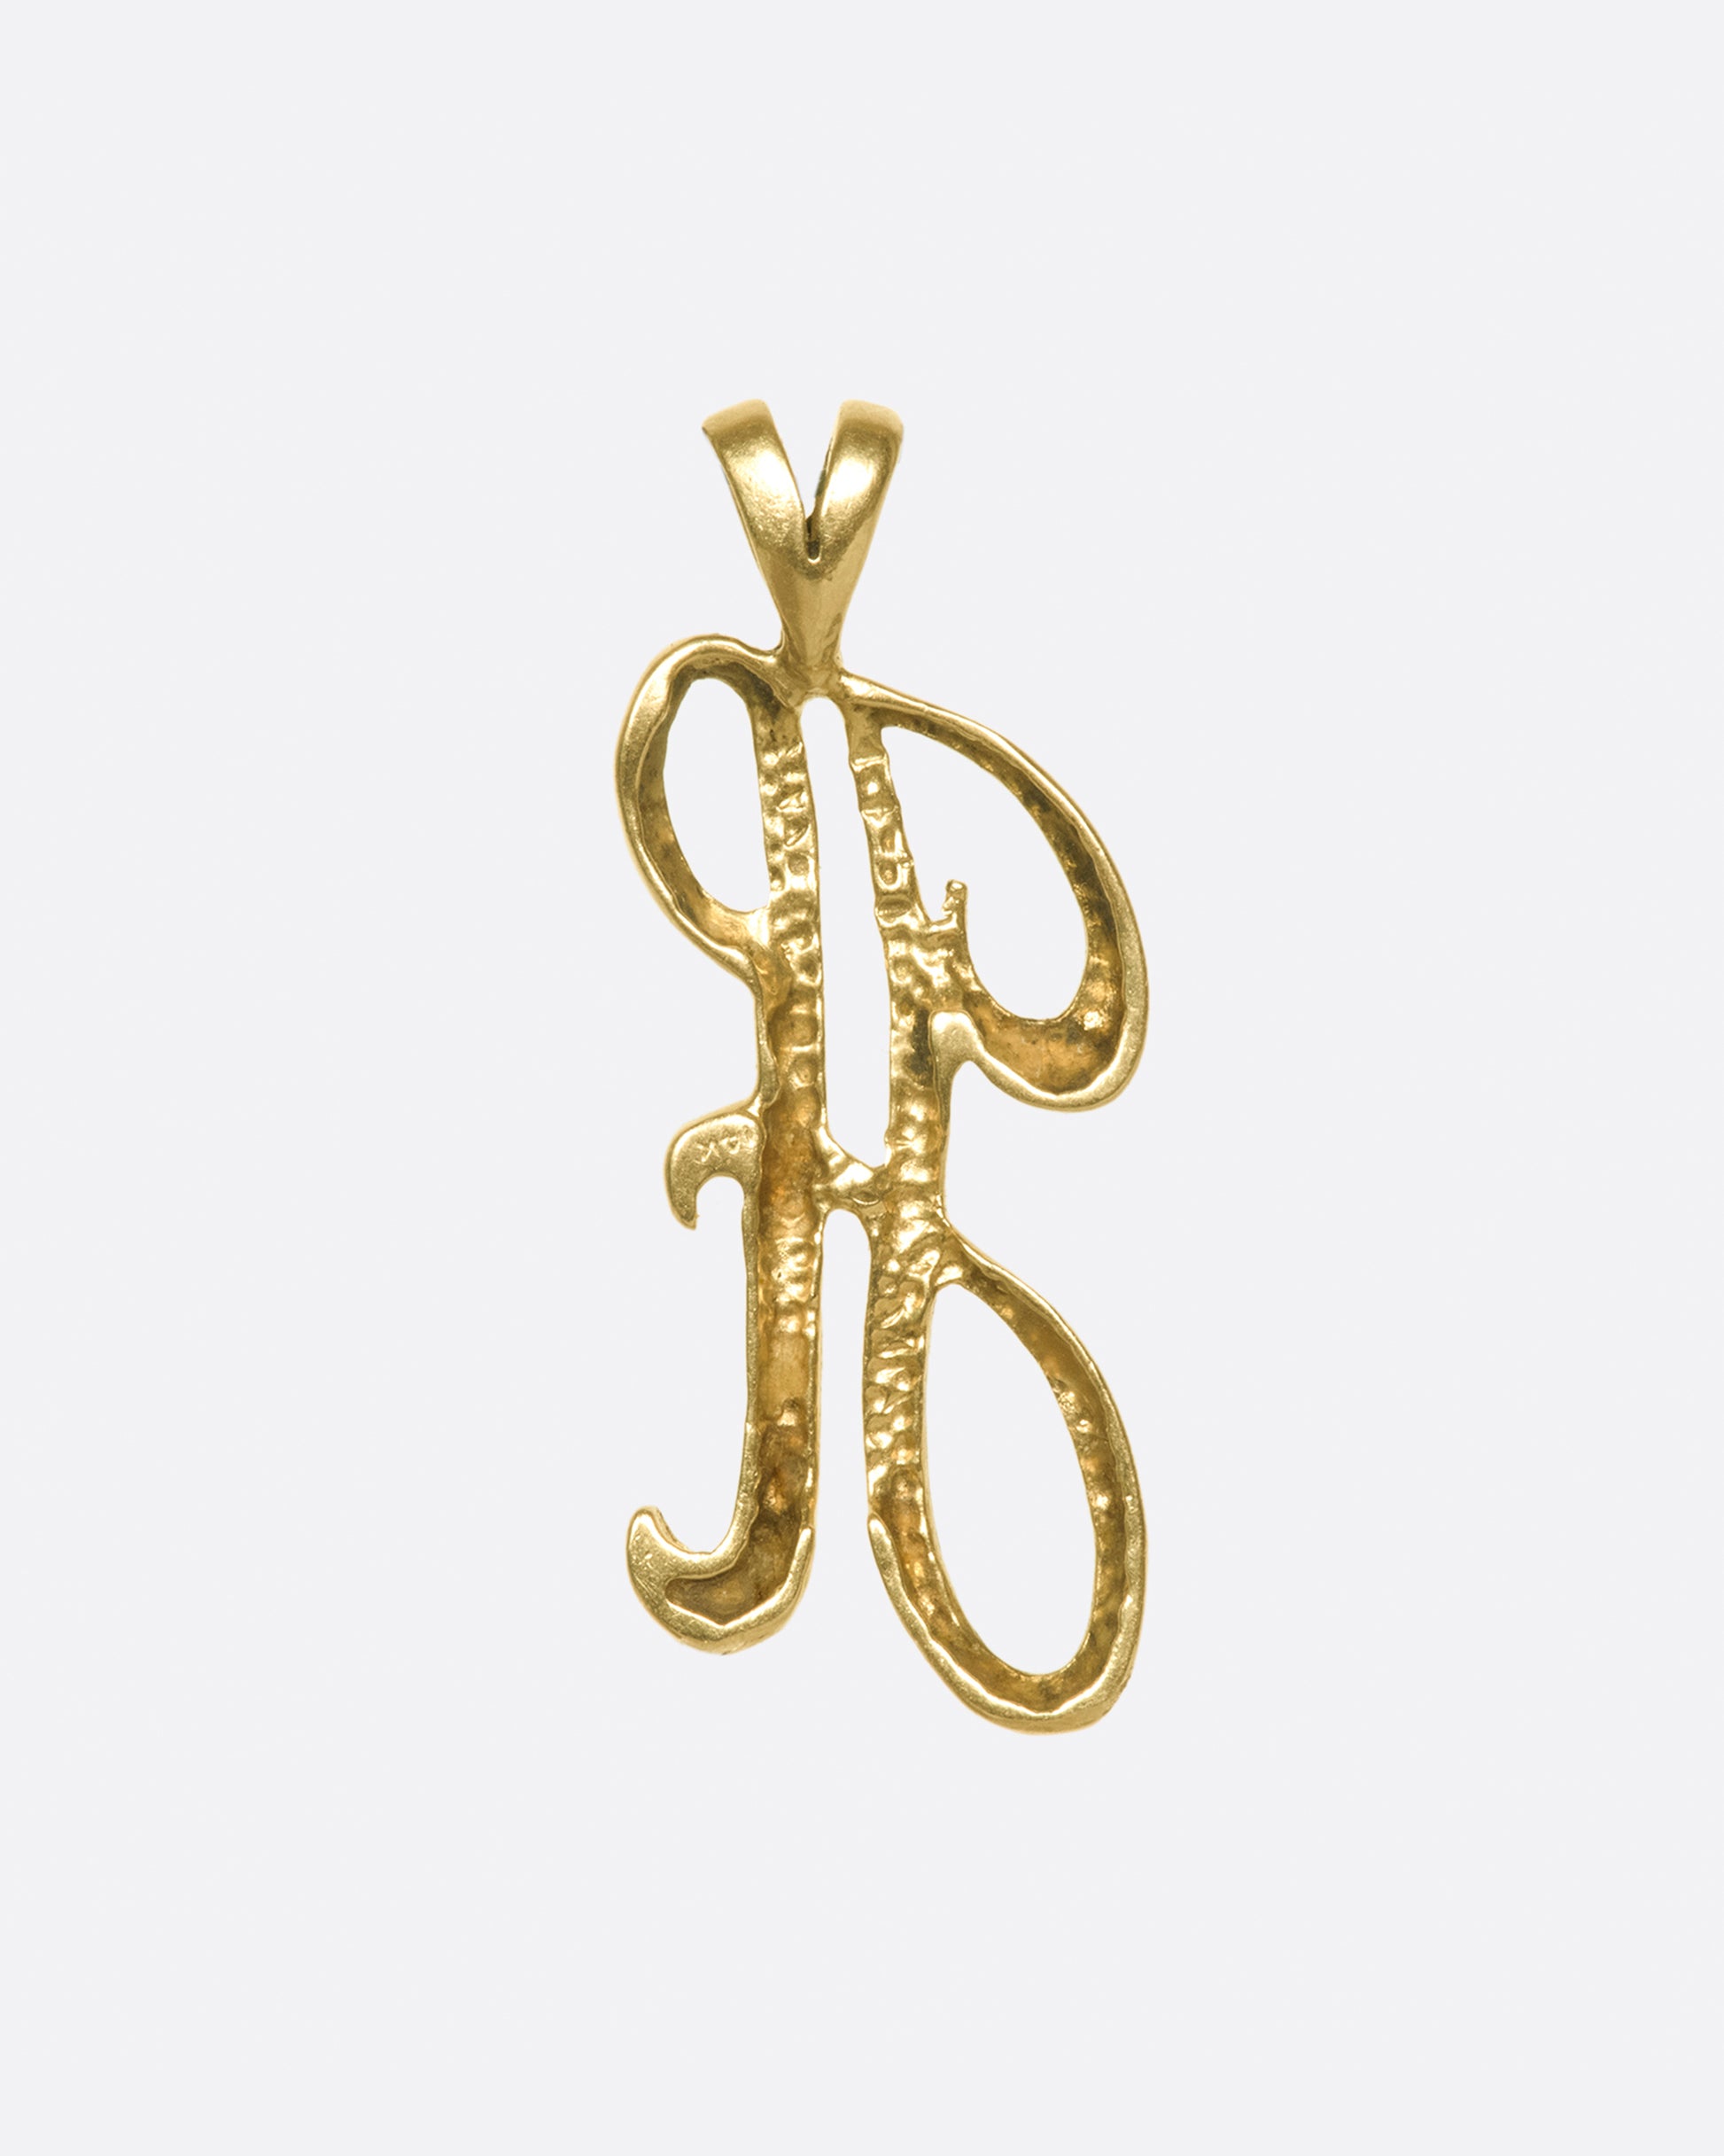 A swirly, cursive H to hang from your favorite chain.